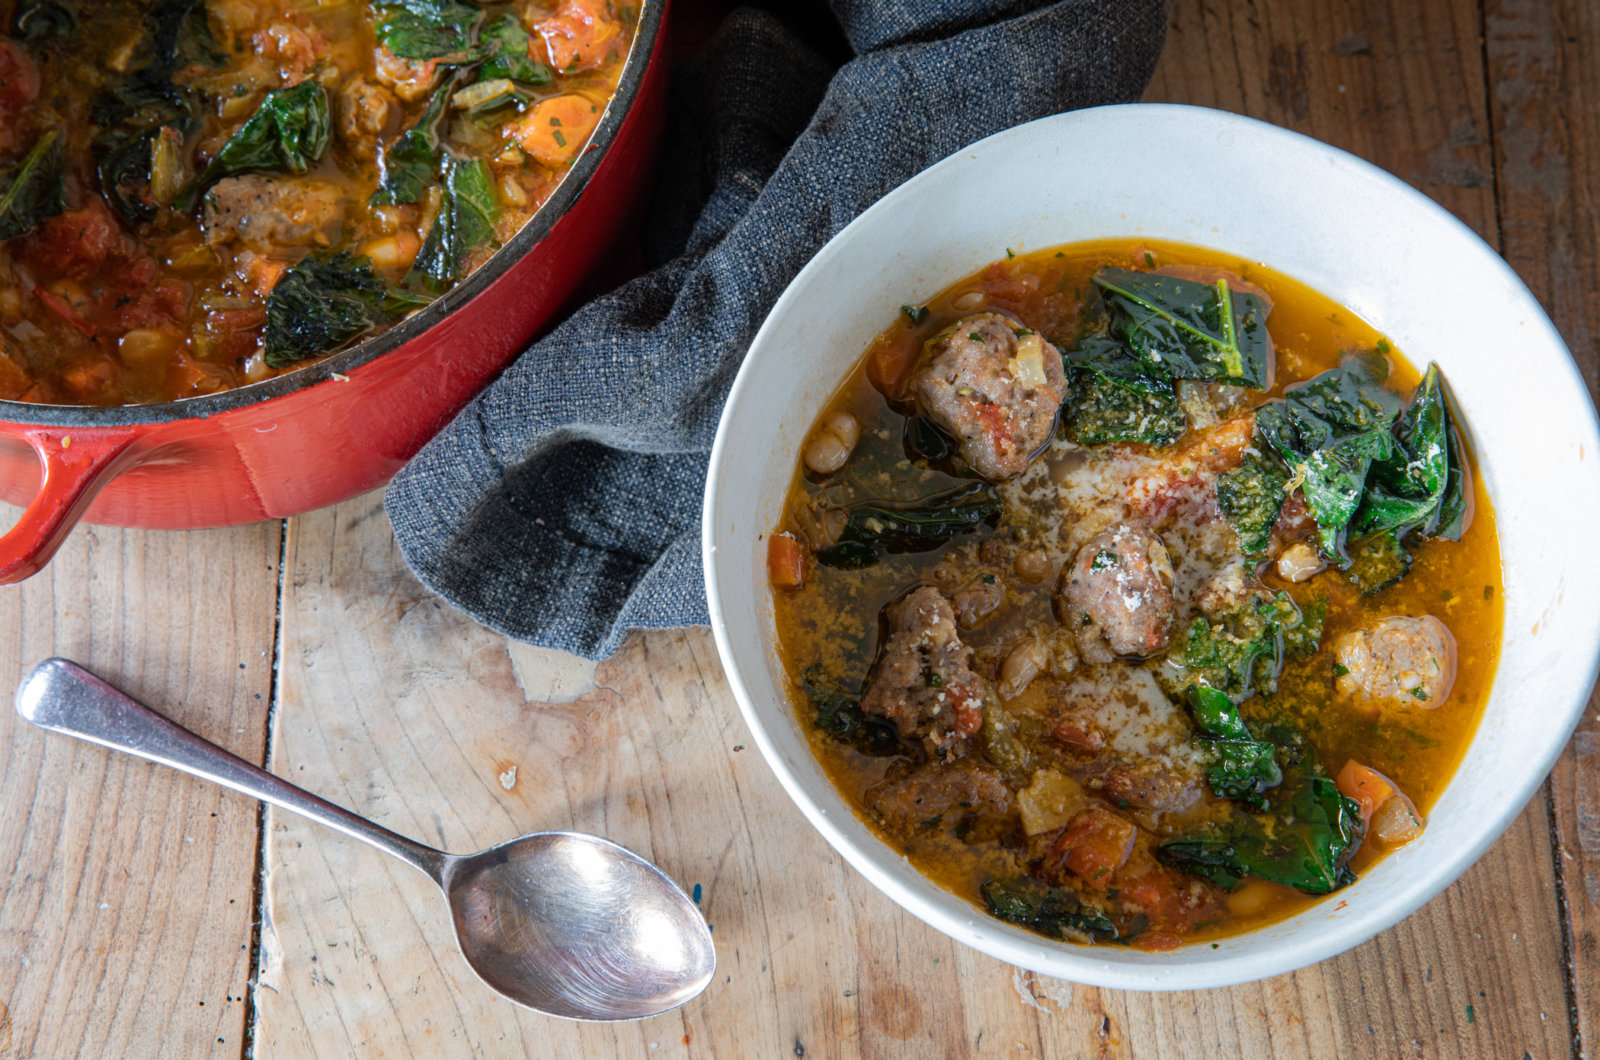 Fennel Sausage With White Beans And Chard Recipe By Valentine Warner